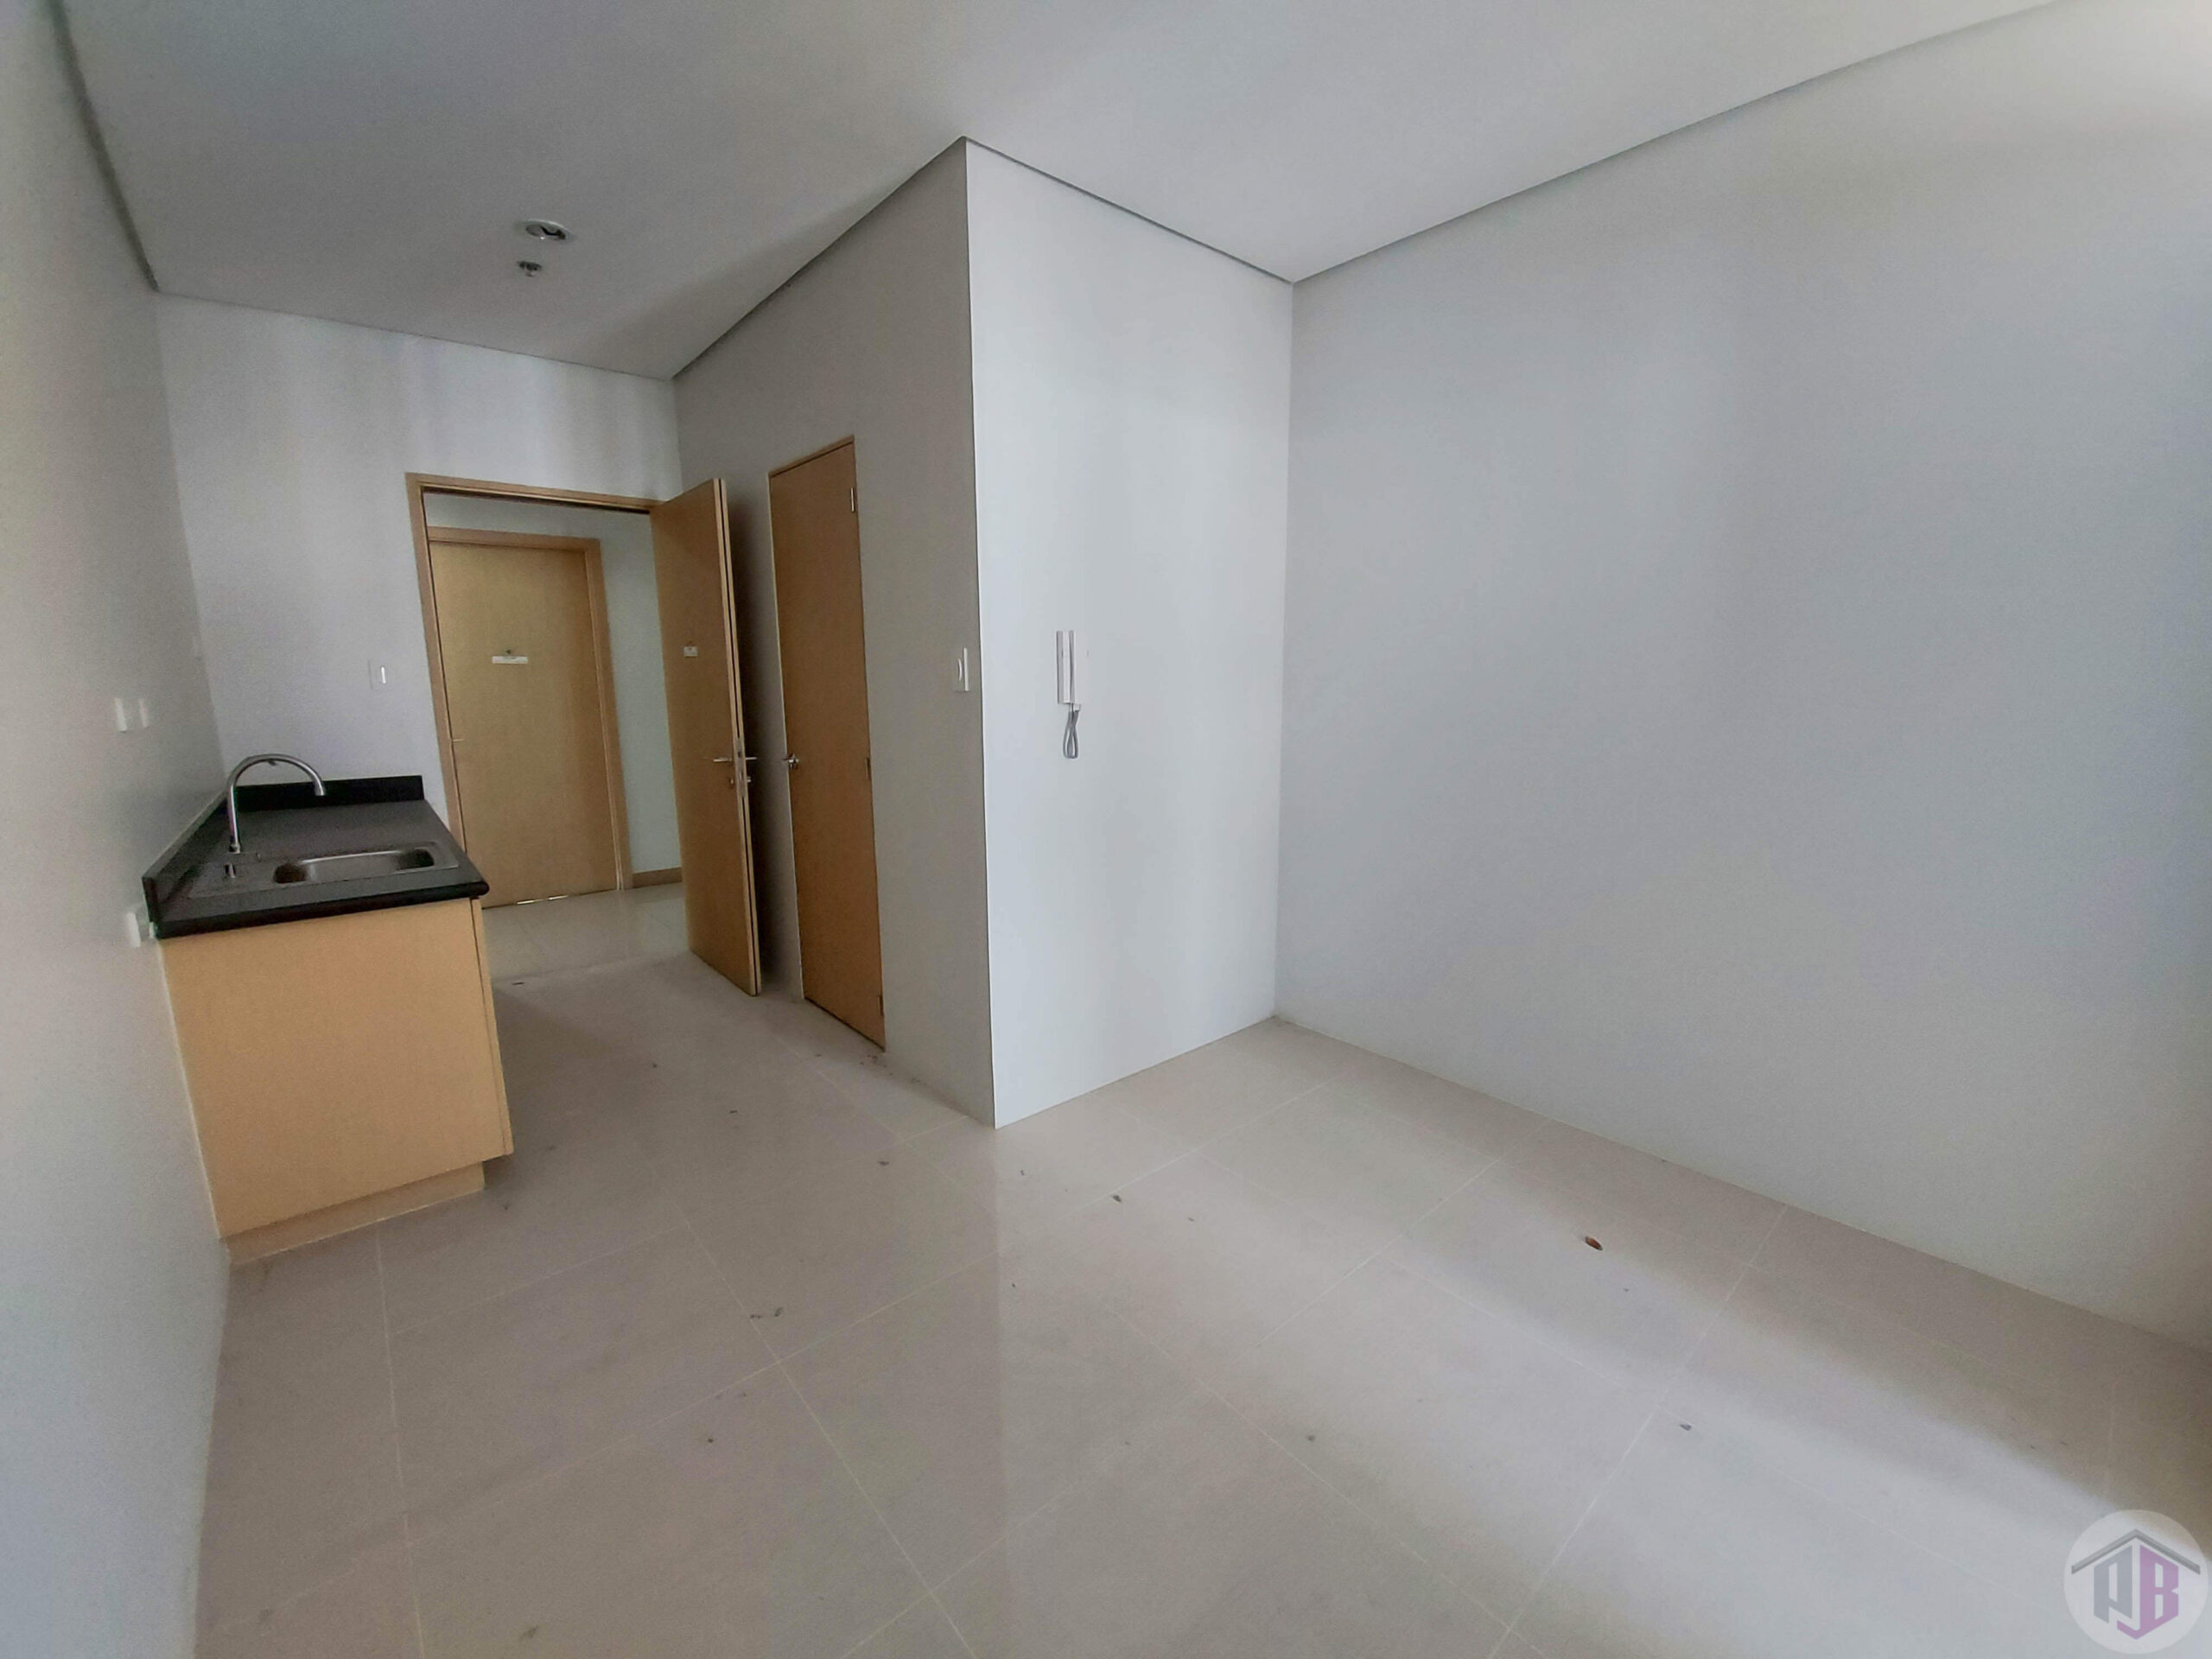 Stellar Pre-Owned 1BR unit Location: Tower 4 Fern at Grass Residences, Bago Bantay, Quezon City (SM North EDSA)